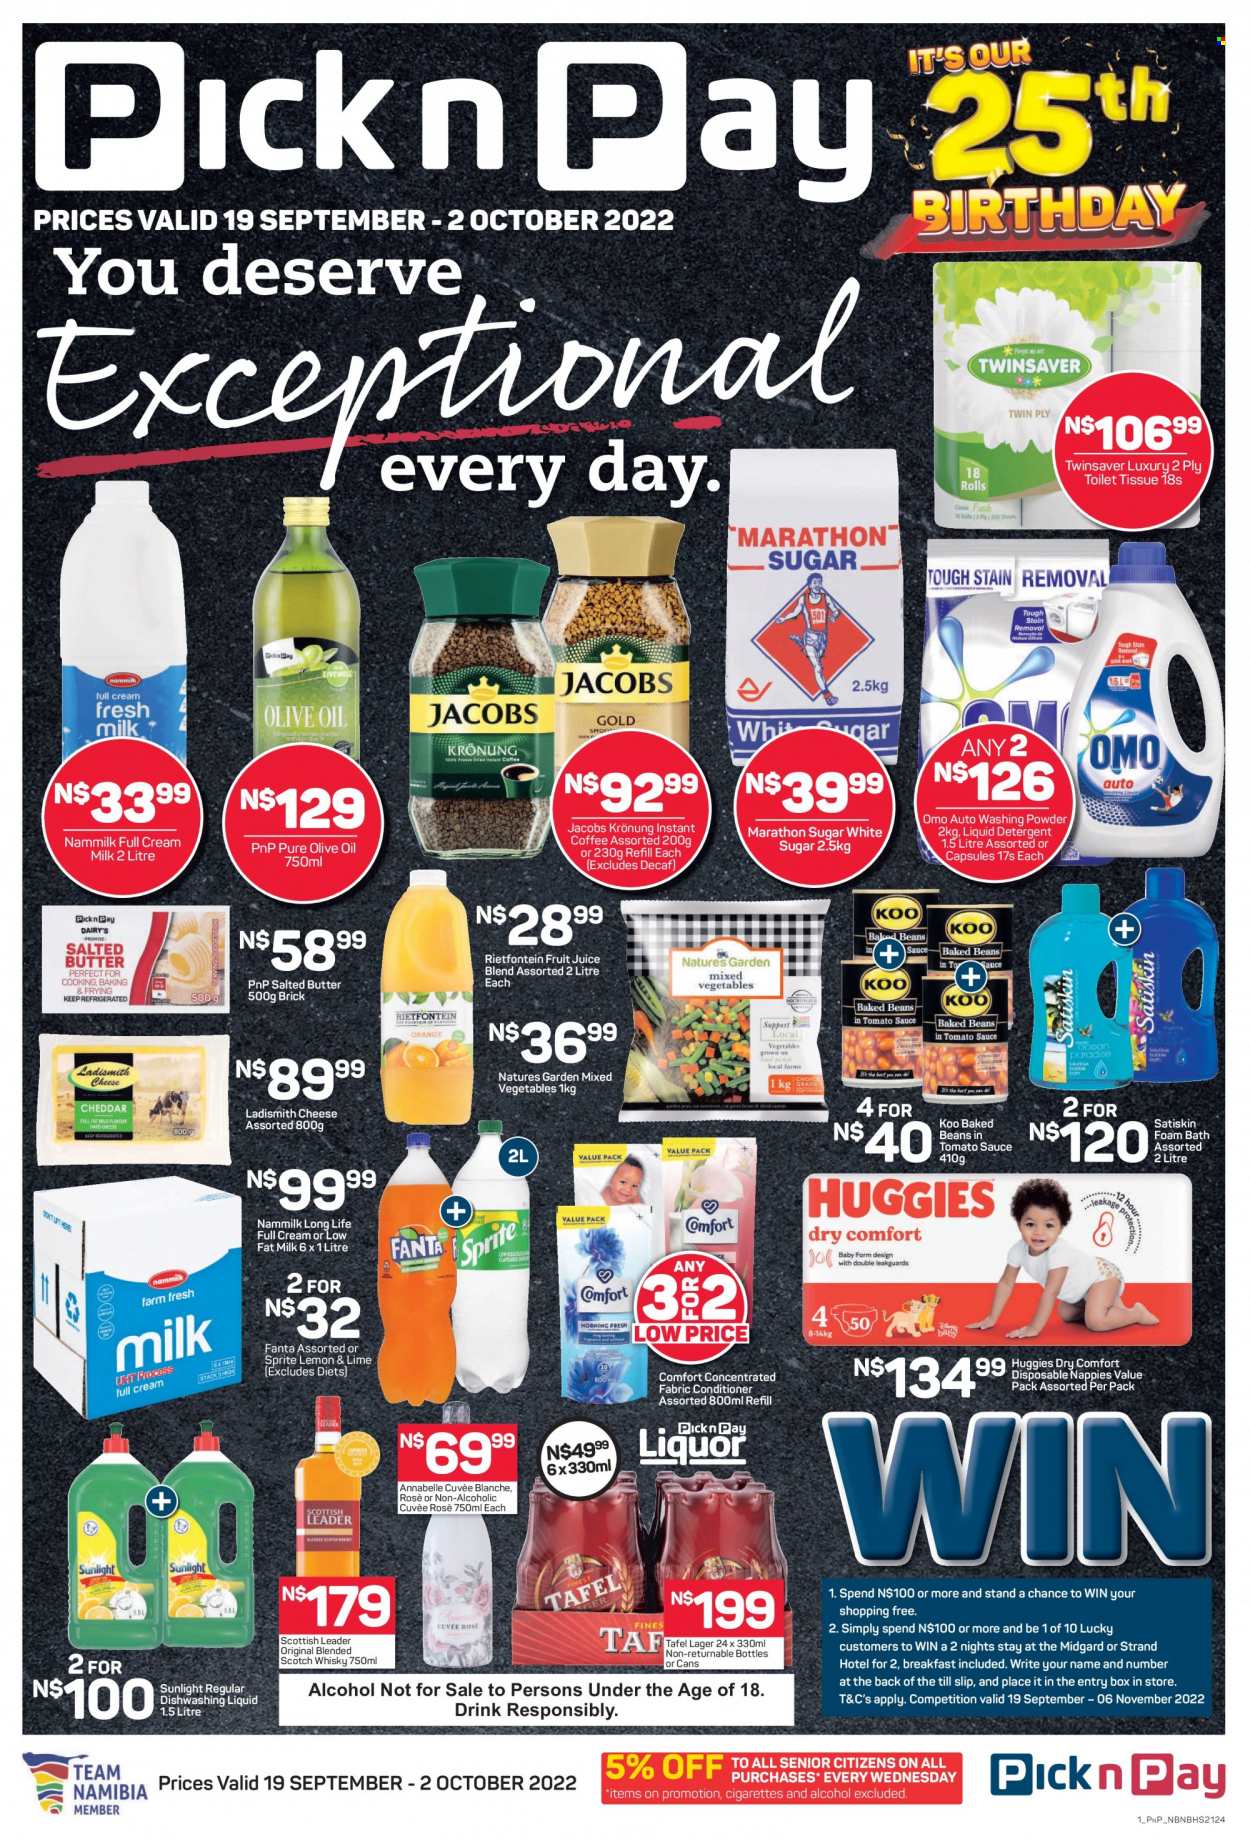 Pick n Pay catalogue  - 19/09/2022 - 02/10/2022 - Sales products - cheese, butter, Ladismith, salted butter, mixed vegetables, Natures Garden, sugar, baked beans, Koo, olive oil, oil, Sprite, Fanta, fruit juice, juice, instant coffee, Jacobs, Jacobs Krönung, Cuvée, alcohol, rosé wine, scotch whisky, whisky, beer, Lager, Huggies, nappies, detergent, fabric conditioner, Omo, liquid detergent, laundry powder, Sunlight, dishwashing liquid, bath foam, Satiskin. Page 1.